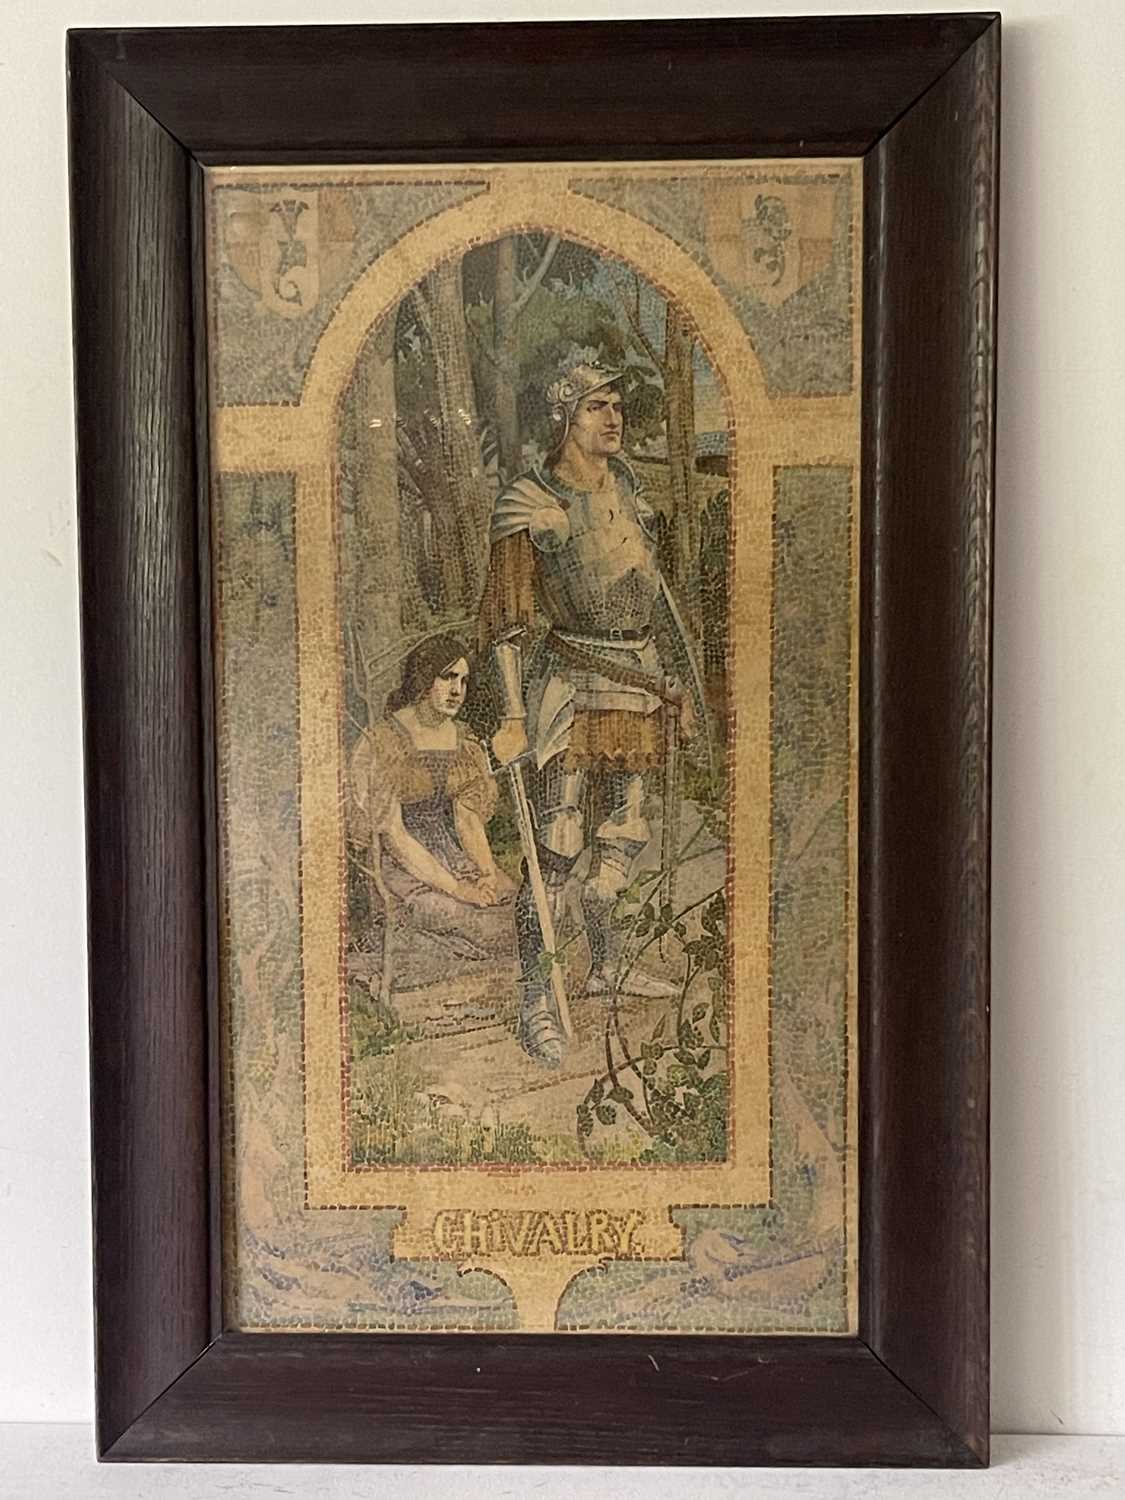 Arts & Crafts School, circa 1900, 'Chivalry' - a knight in armour guarding a maiden, titled l.c., - Image 2 of 3